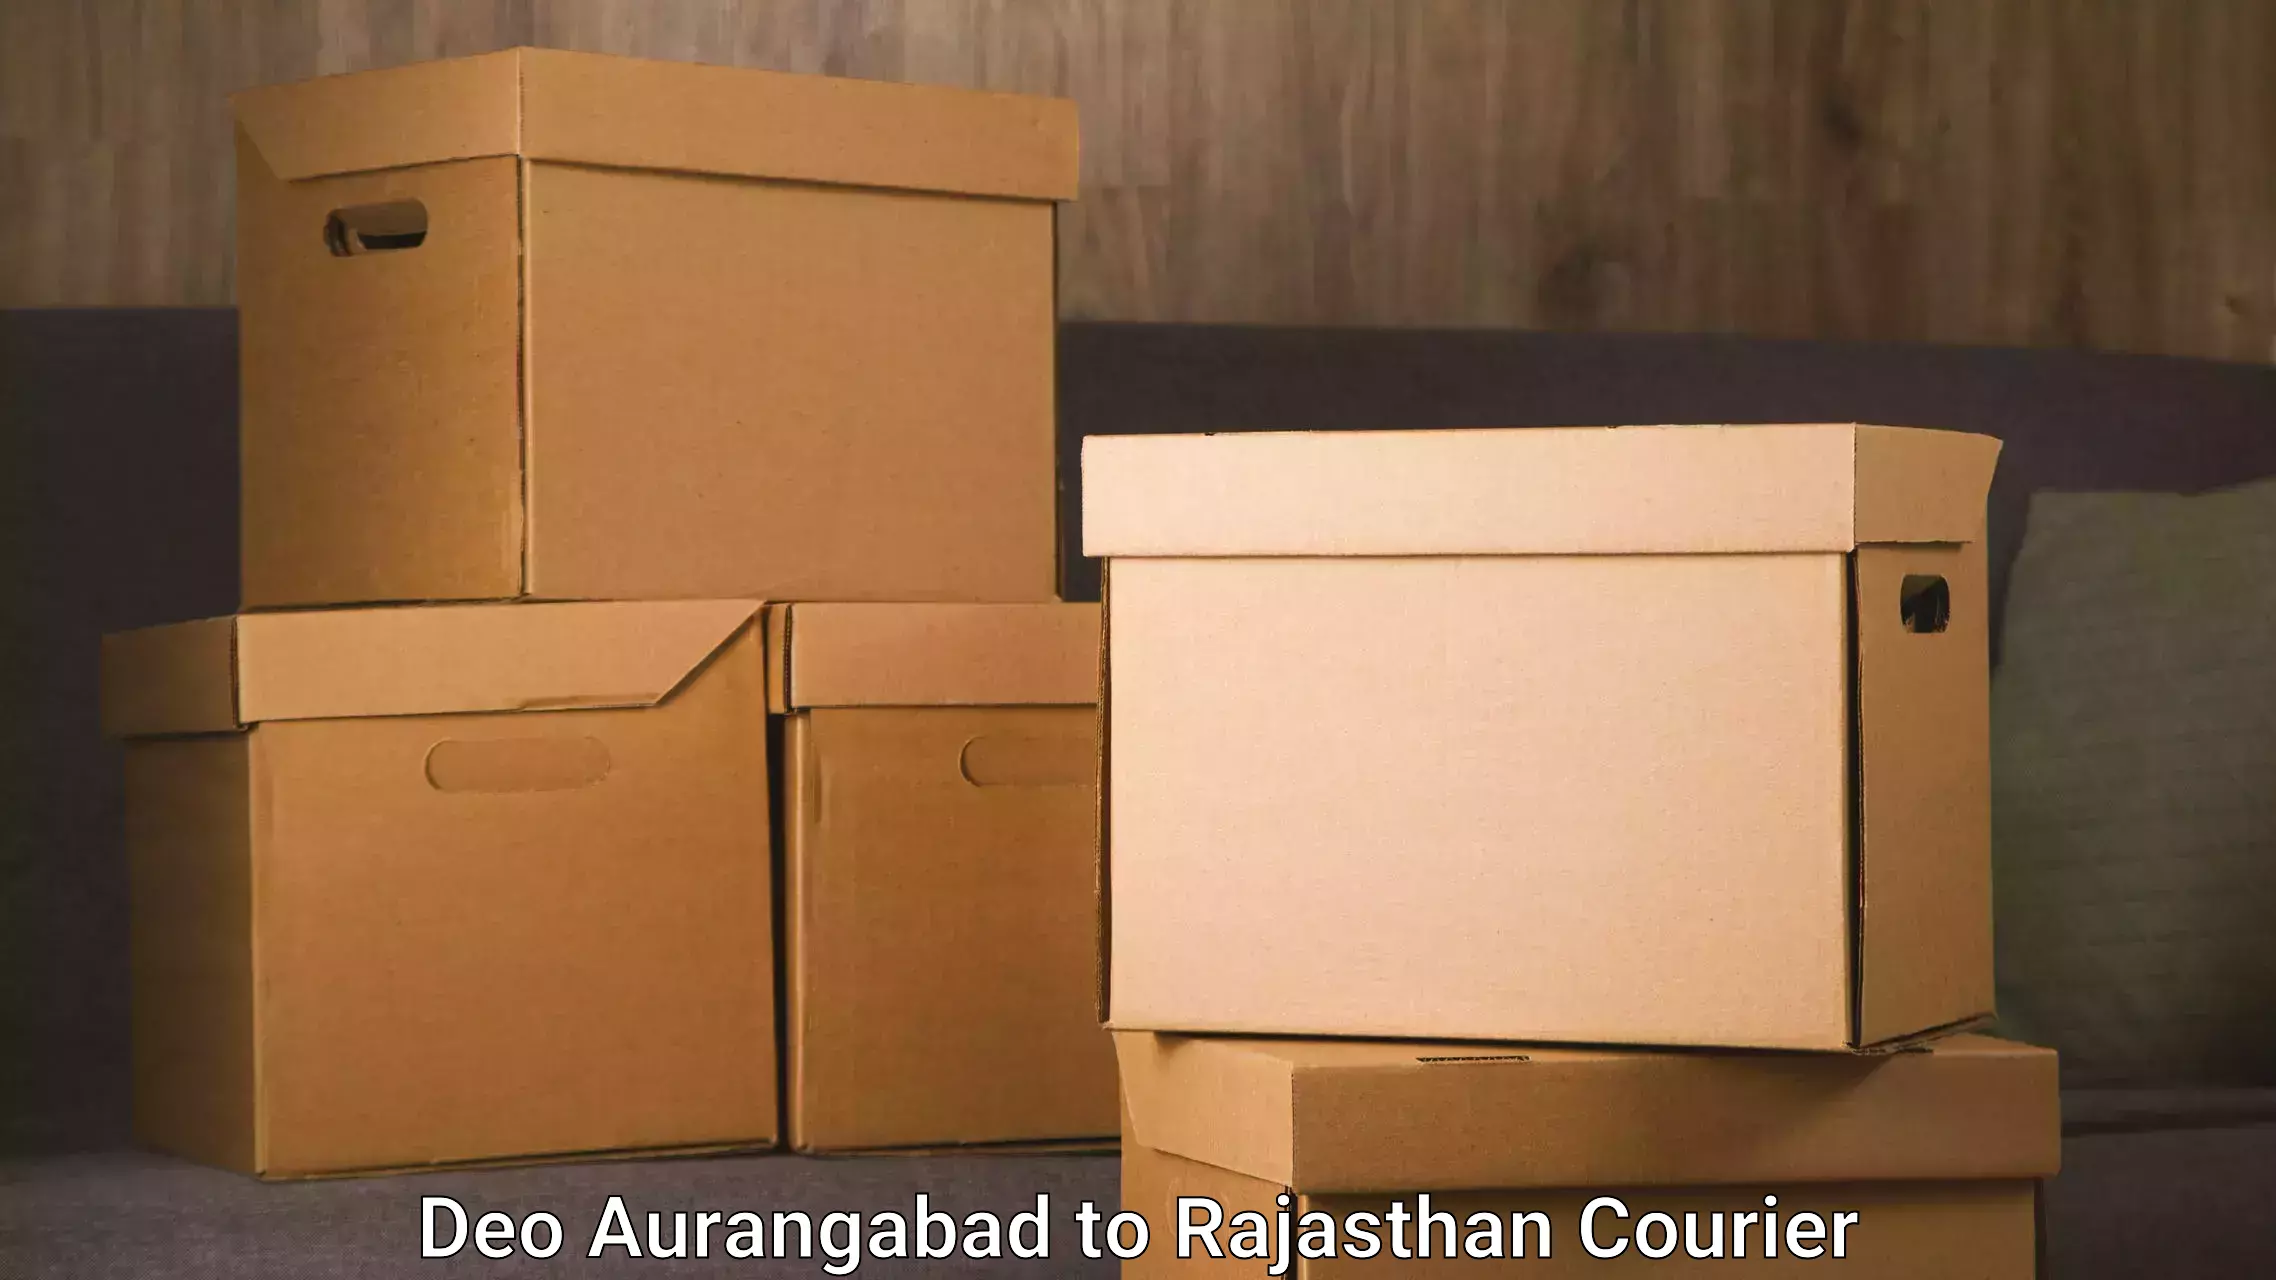 Trusted relocation experts Deo Aurangabad to Rajasthan